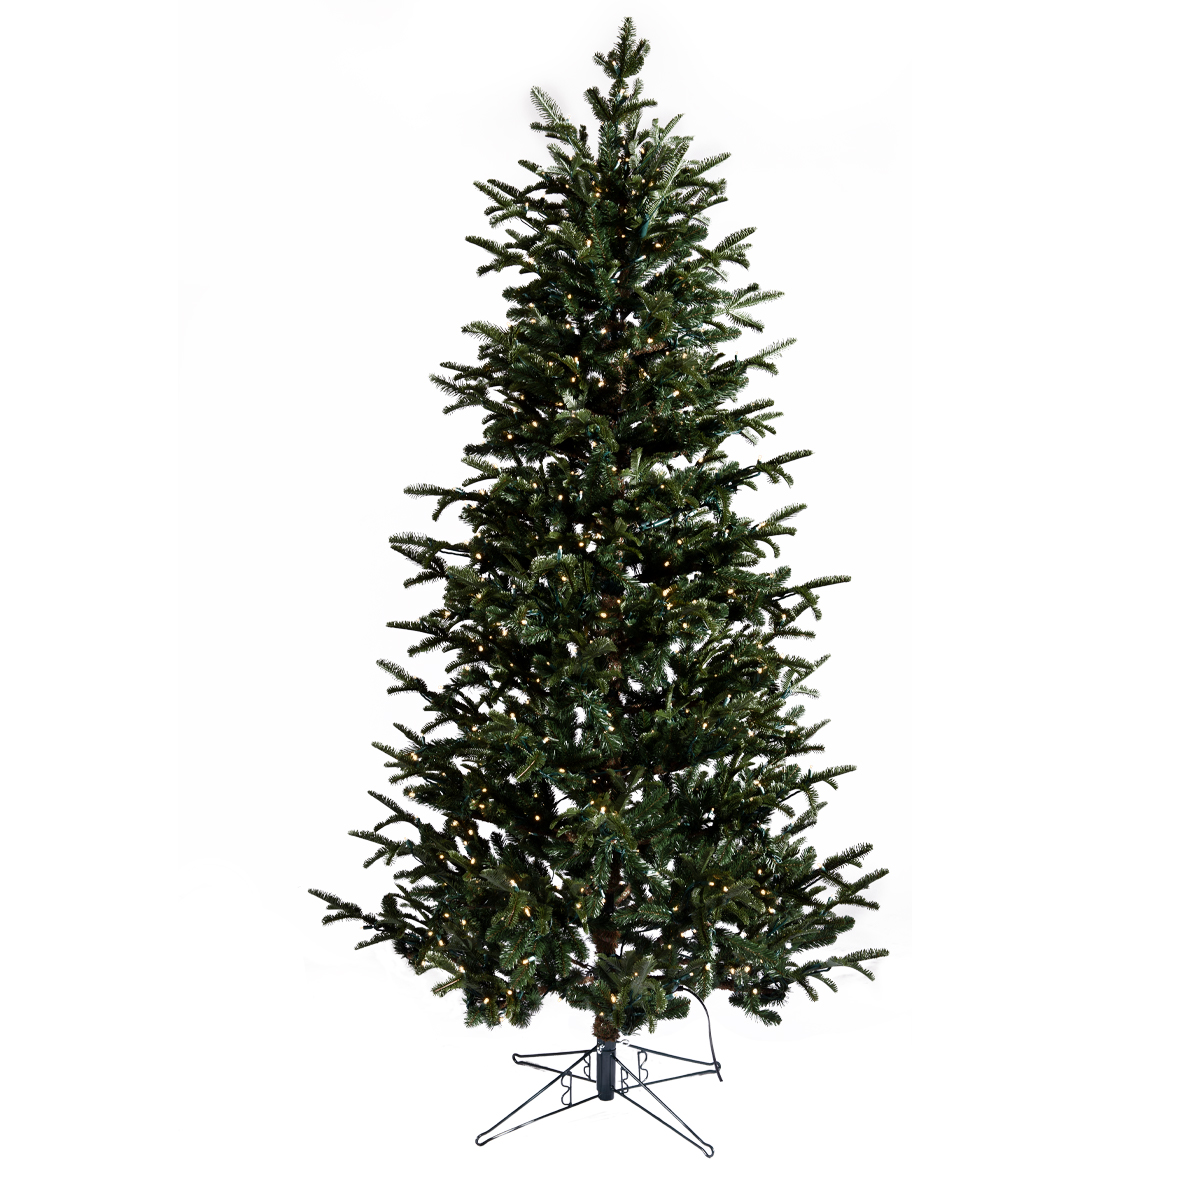 Star Fir Deluxe Christmas Tree - Pencil Style - Warm White LEDs - One-Plug Power - 10ft Tall